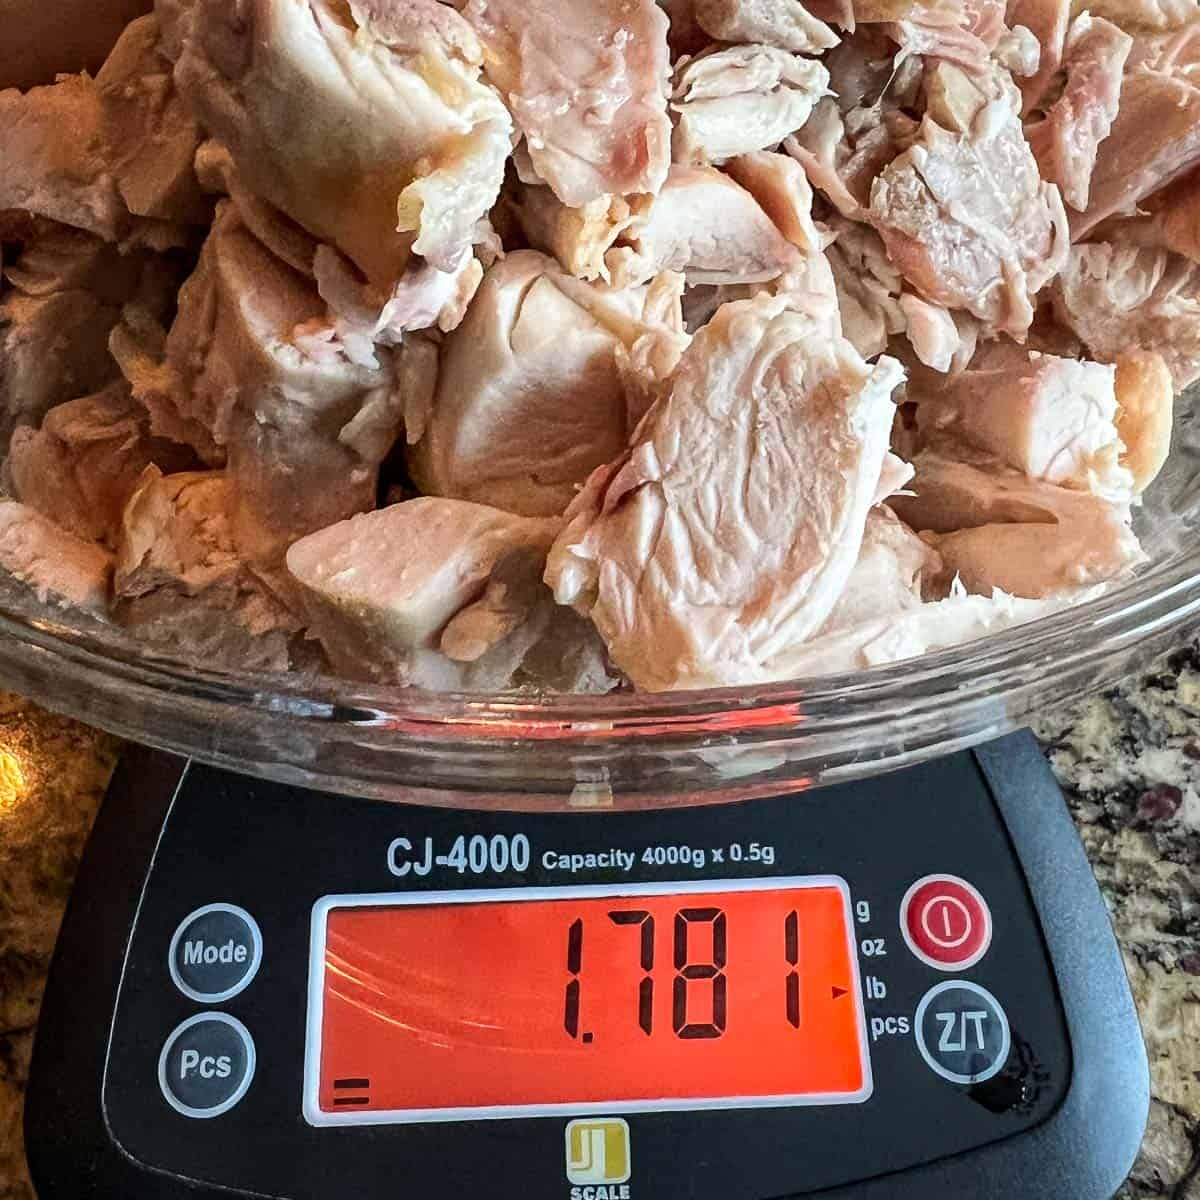 Cut up rotisserie chicken in a clear bowl on a digital scale.